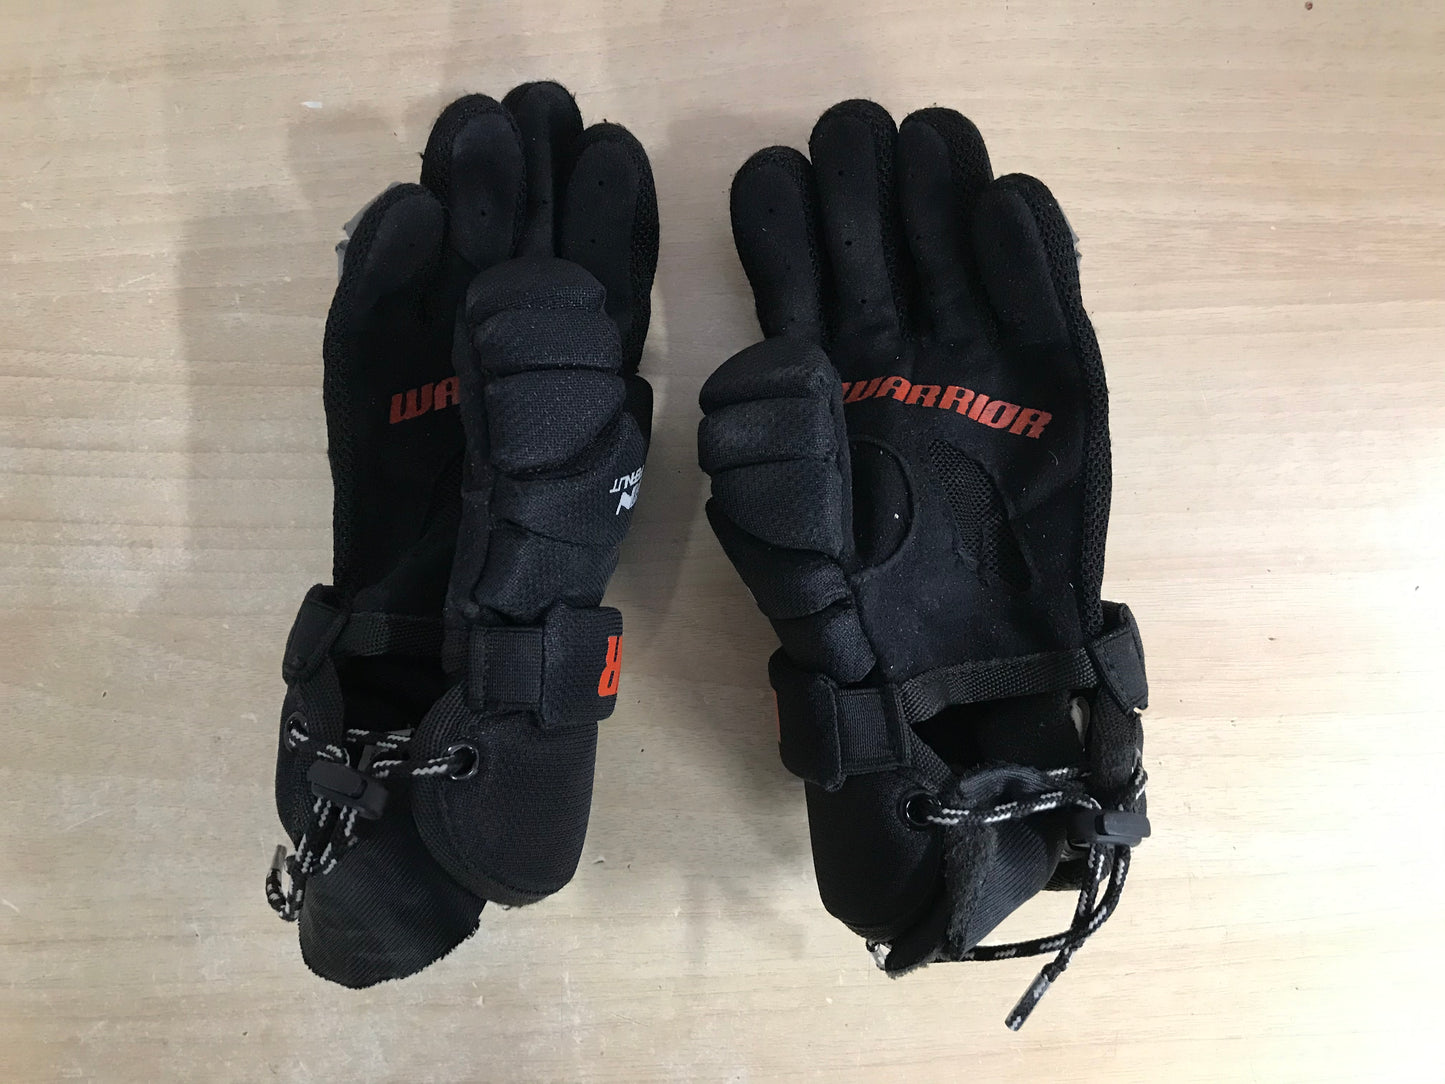 Lacrosse Gloves Child Size 10 inch Age 8-10 Warrior Black Grey Red